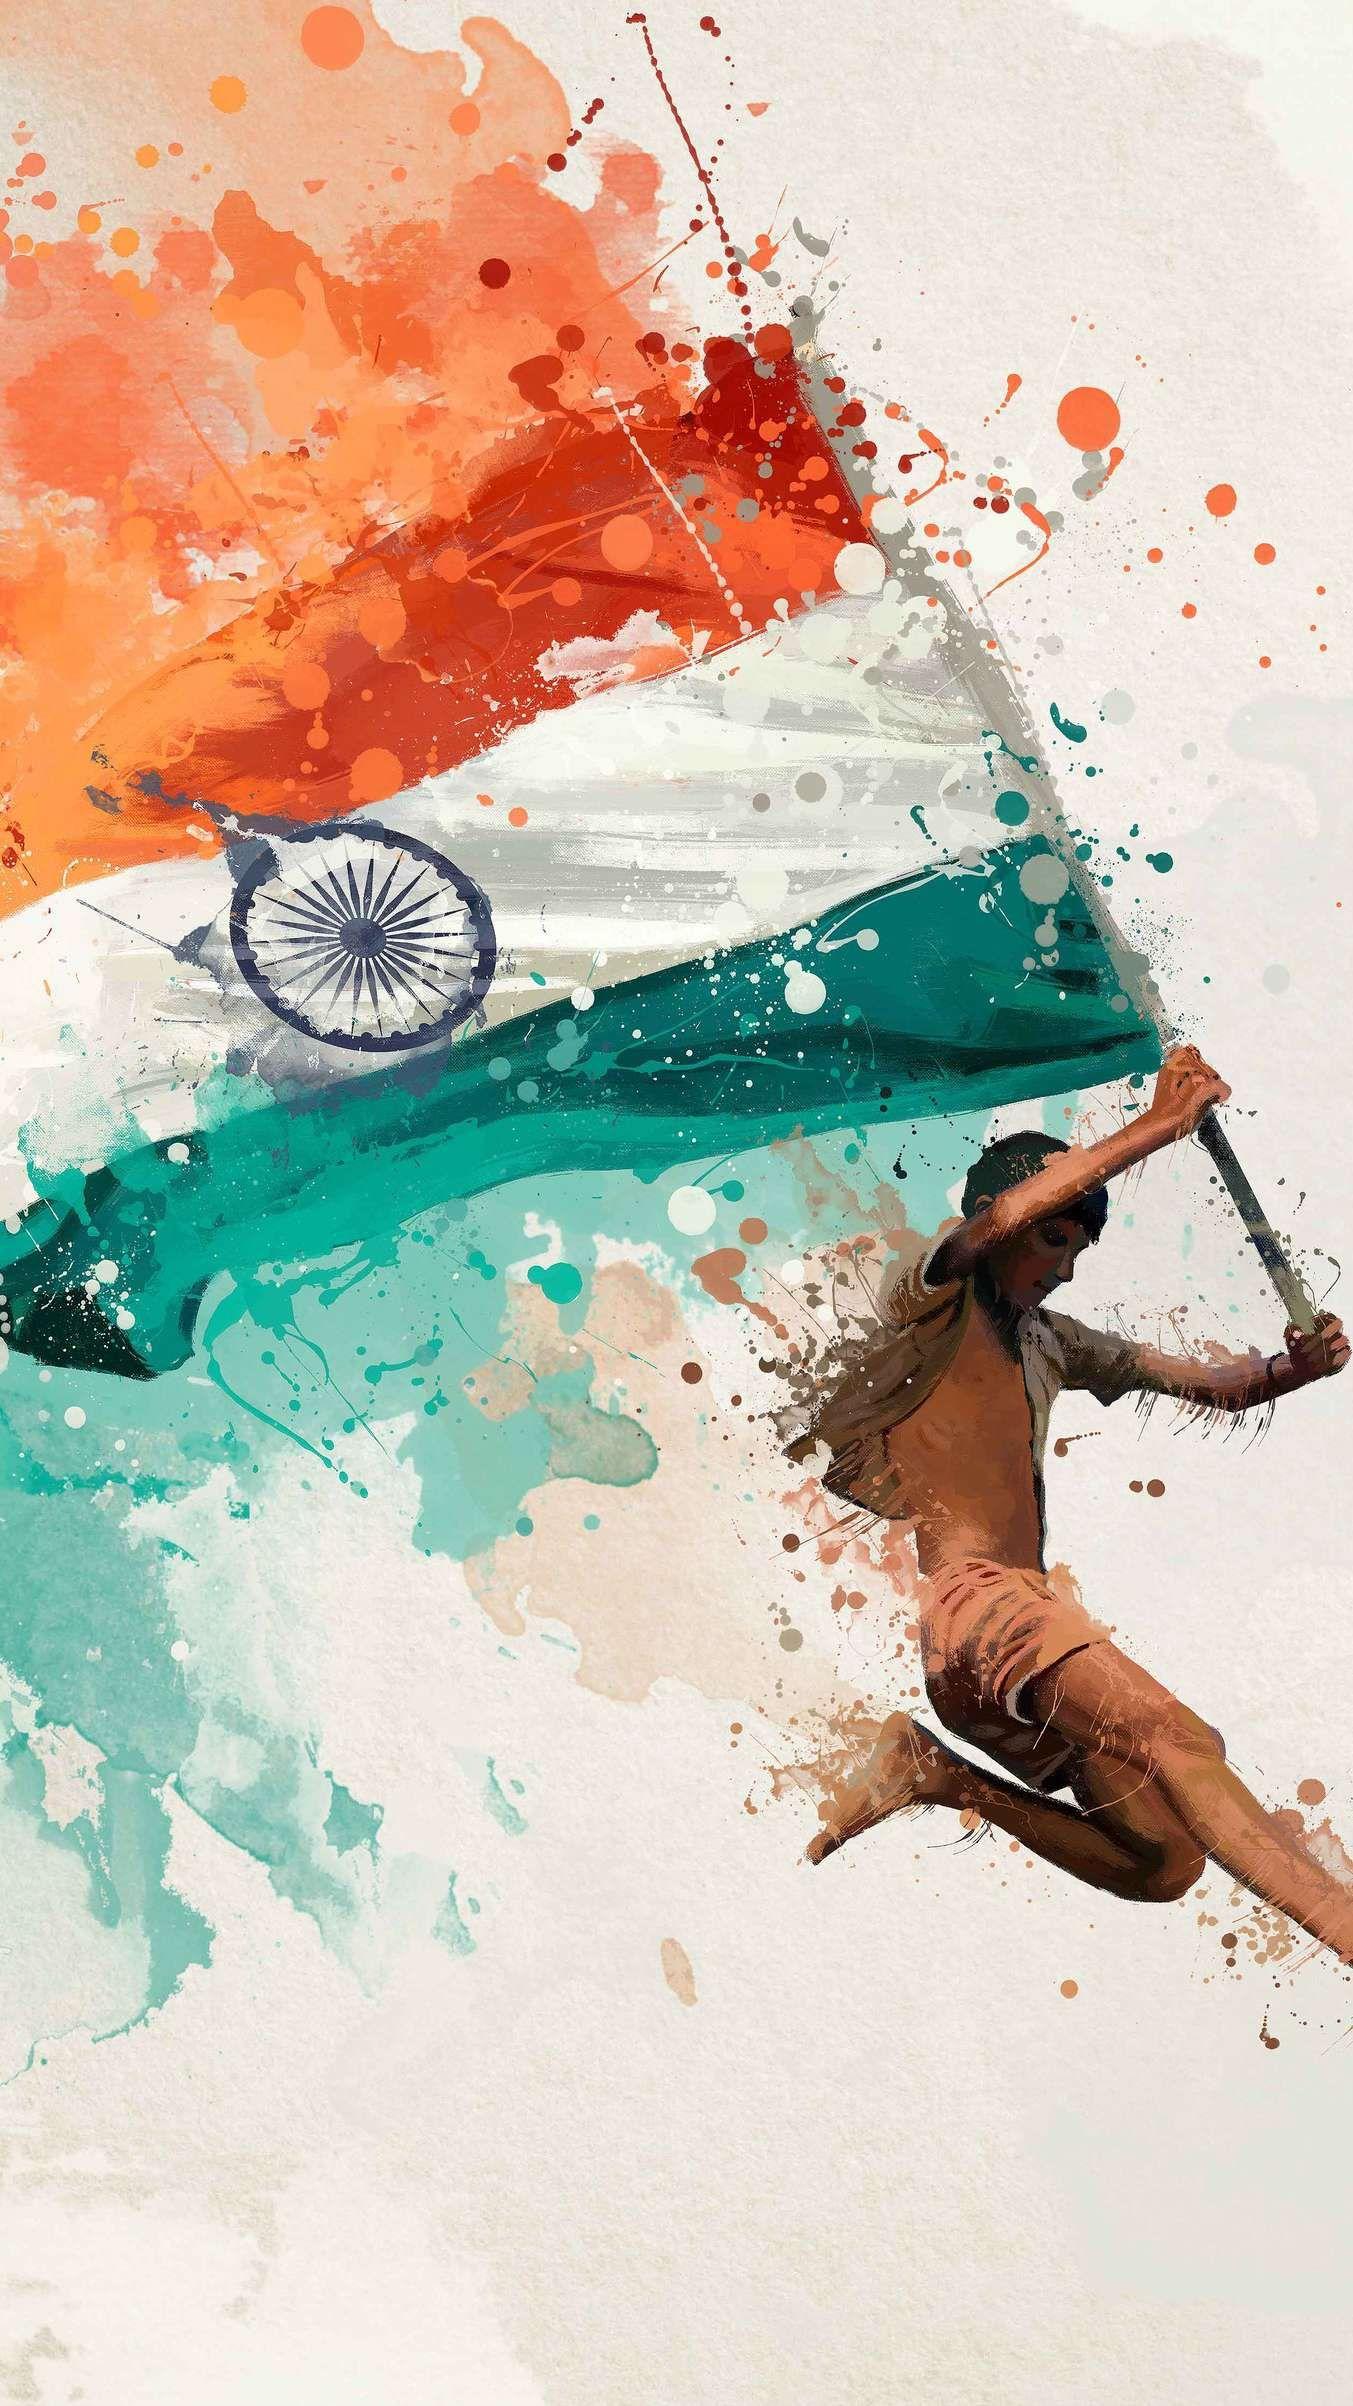 Independence day Indian Flag iPhone Wallpaper. India flag, Indian